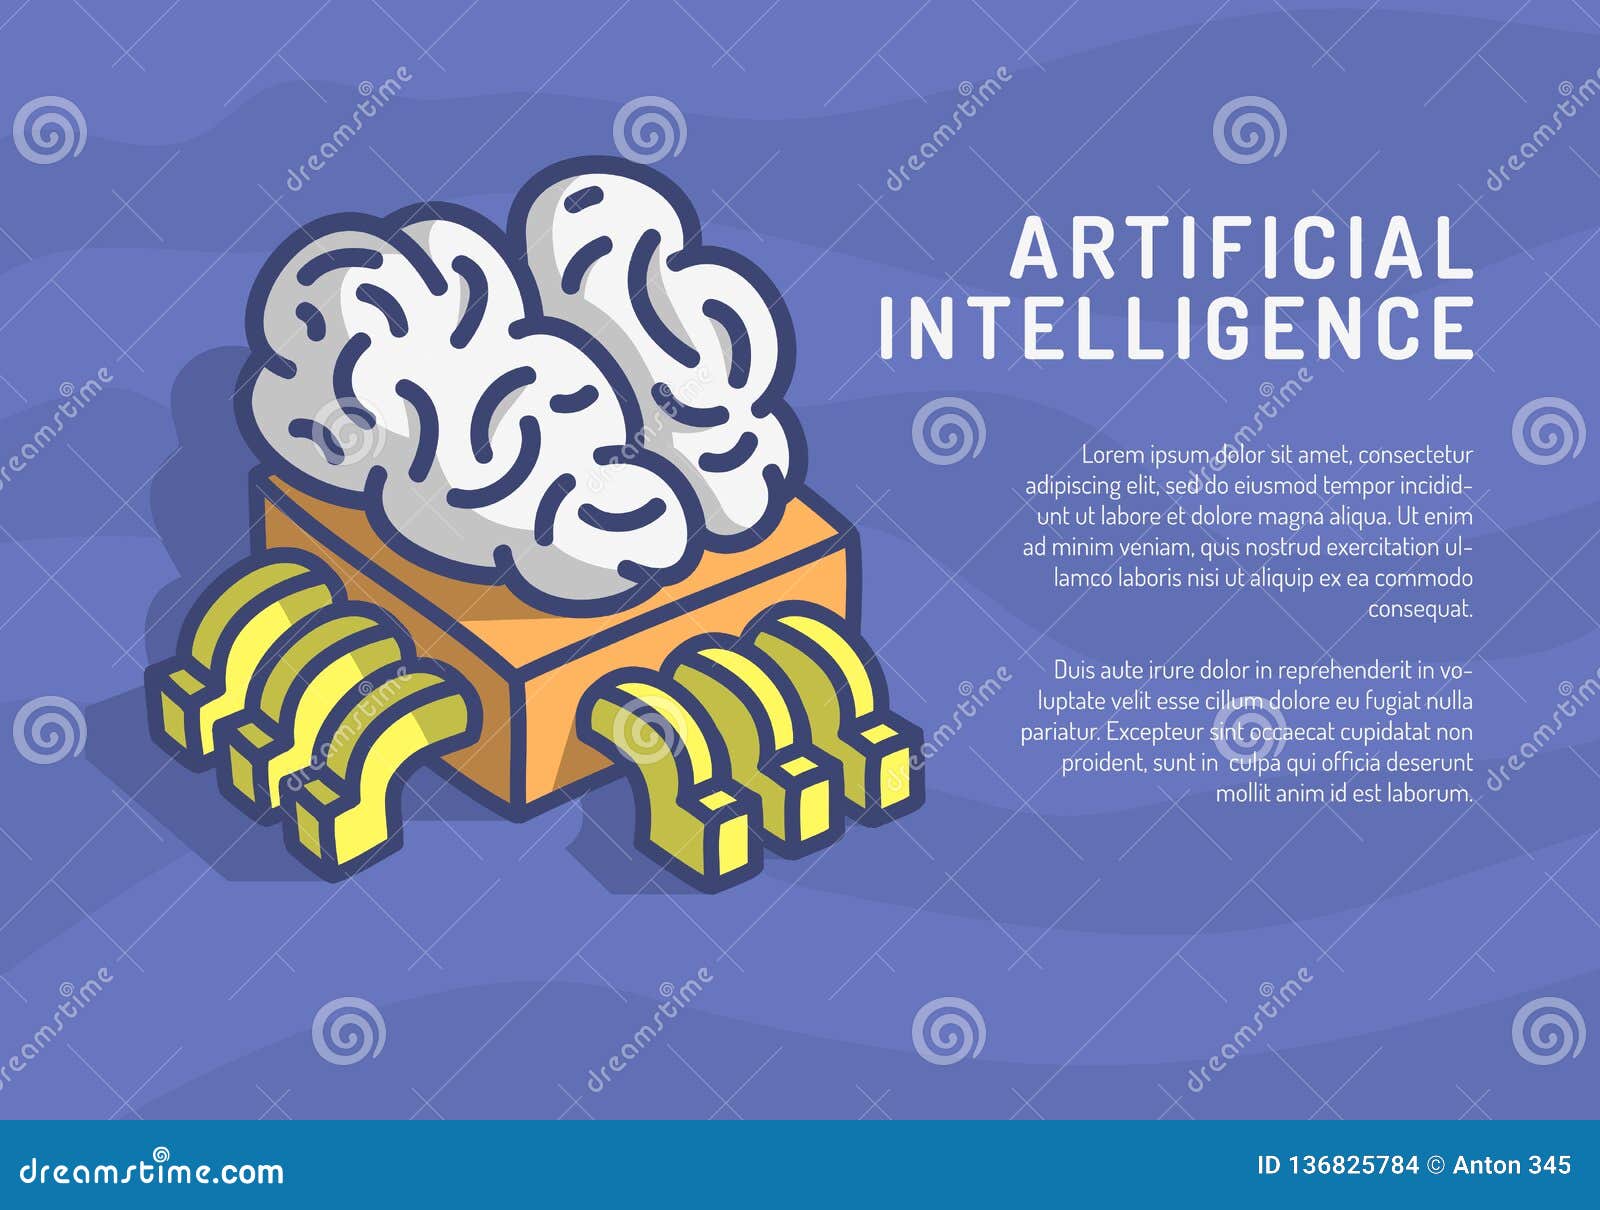 Artificial Intelligence Themed Design Hand Drawn Cartoon Funny Illustration  with Computer Cpu Processor Chip and Human Stock Vector - Illustration of  media, intellect: 136825784